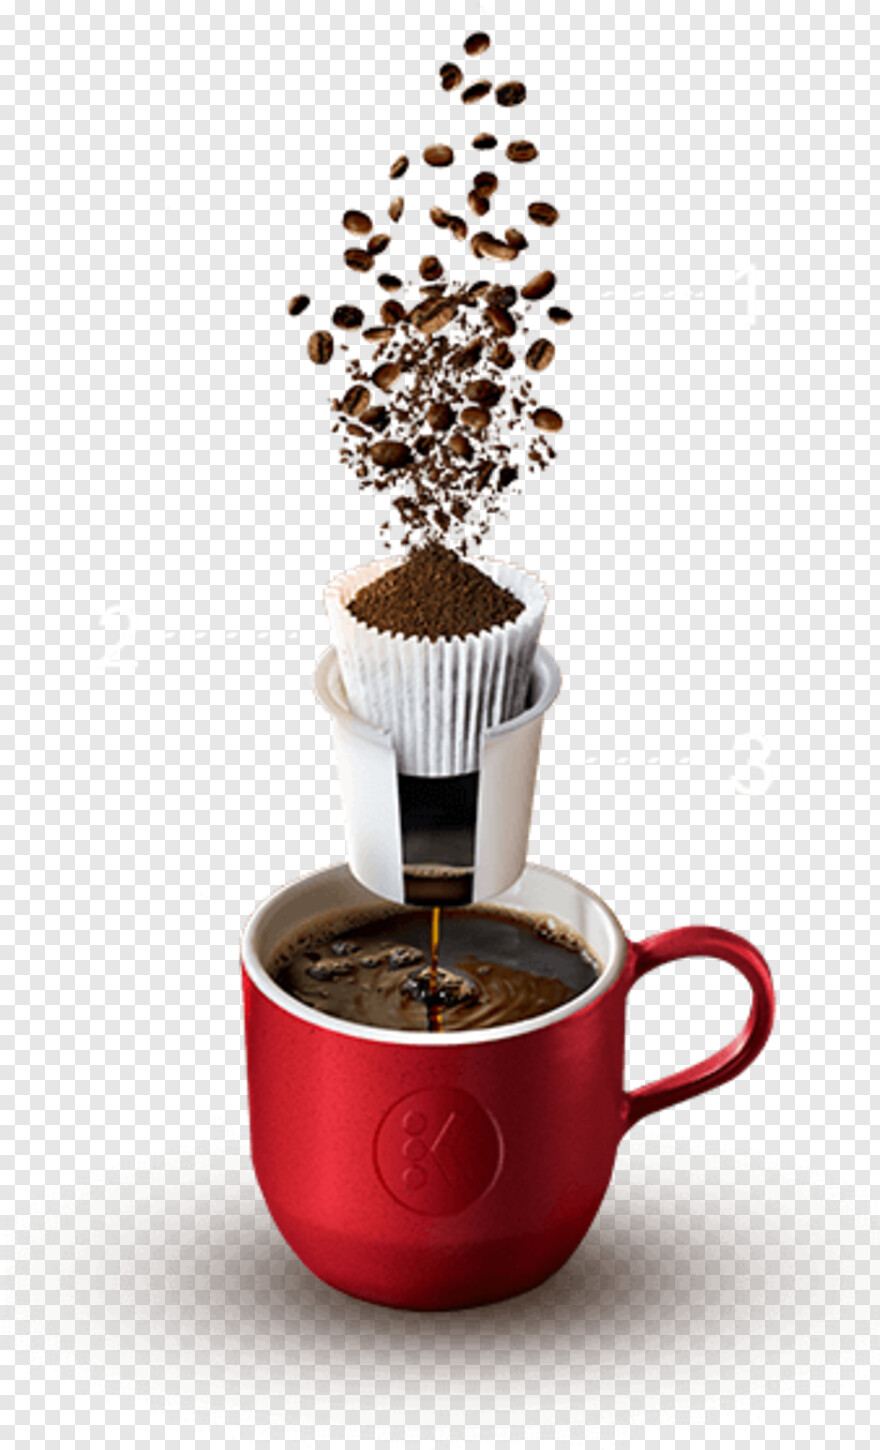 coffee-cup-clipart # 449040